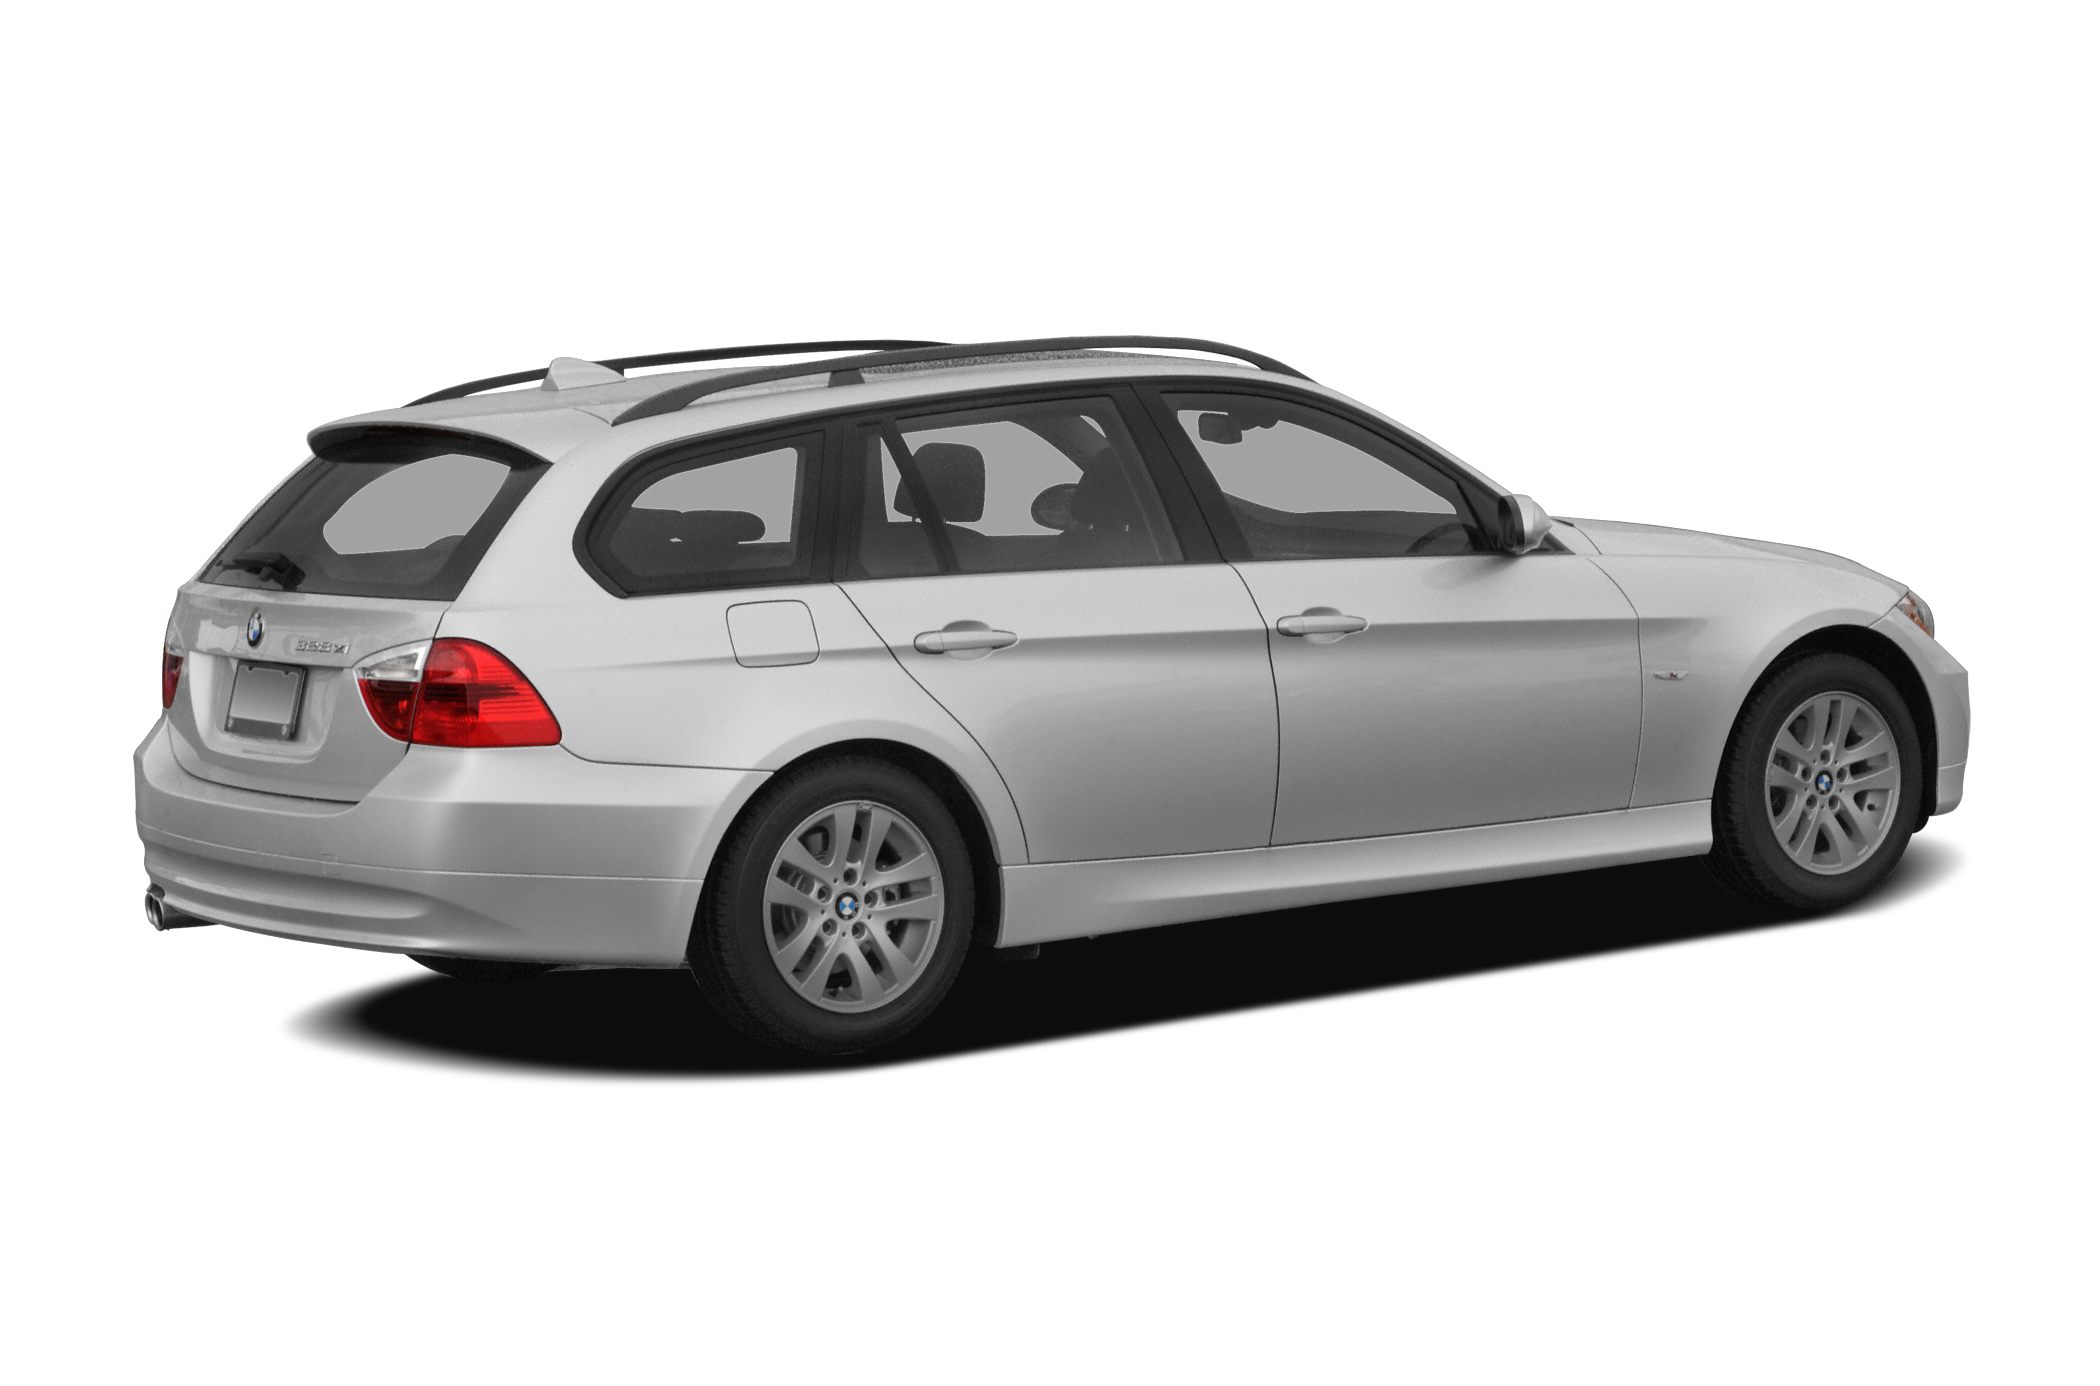 Used bmw for sale in wisconsin #1